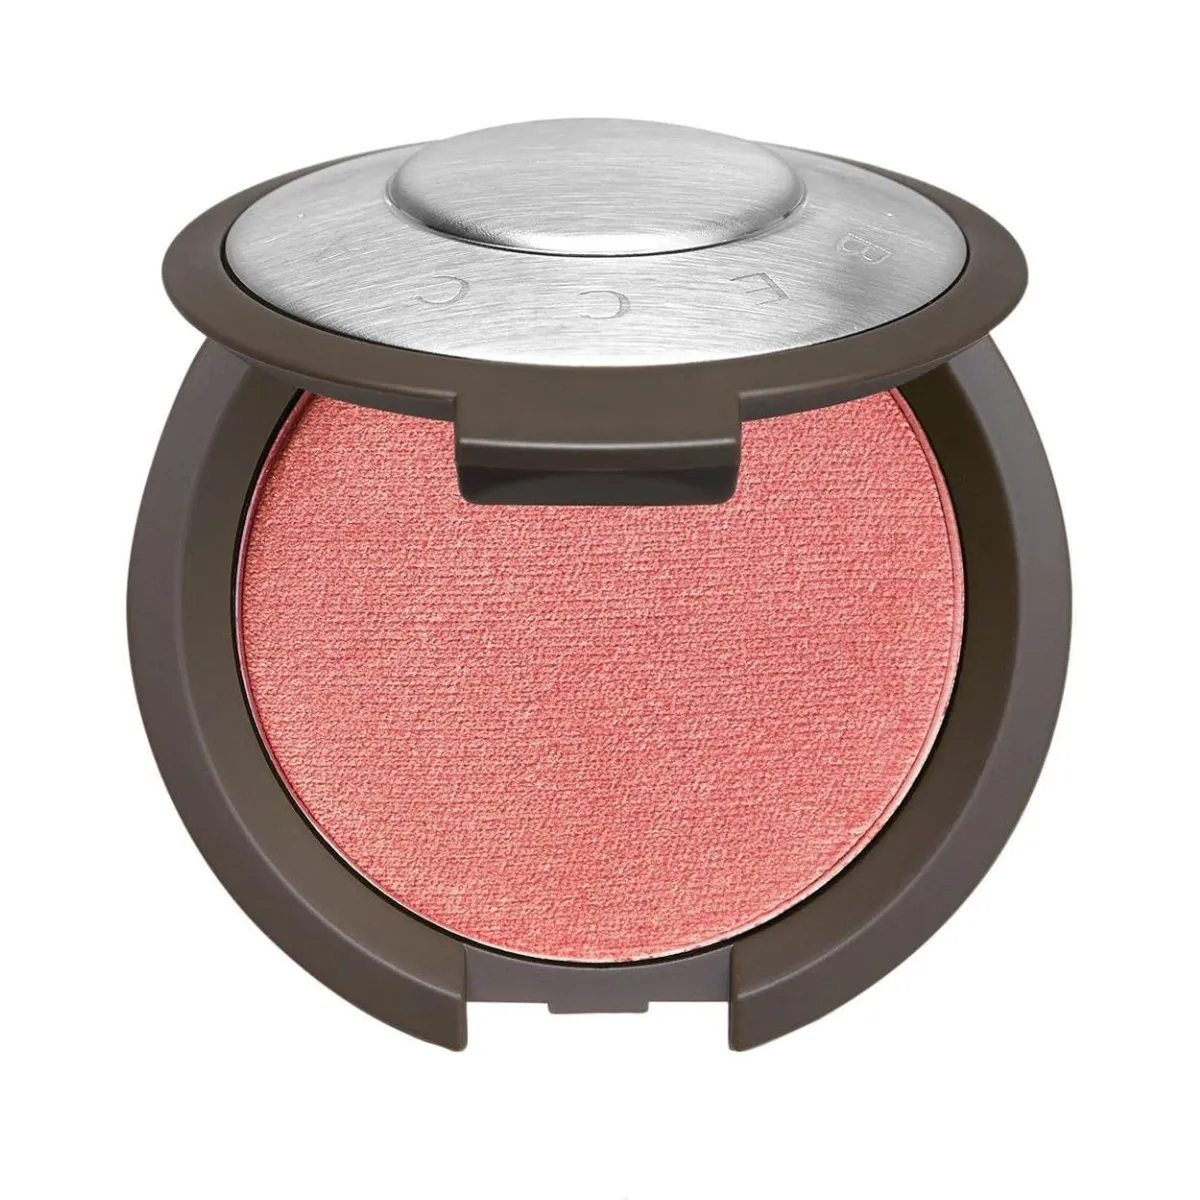 Becca Luminous Blush in Snapdragon - a vivid coral-pink blush compact against a white background.